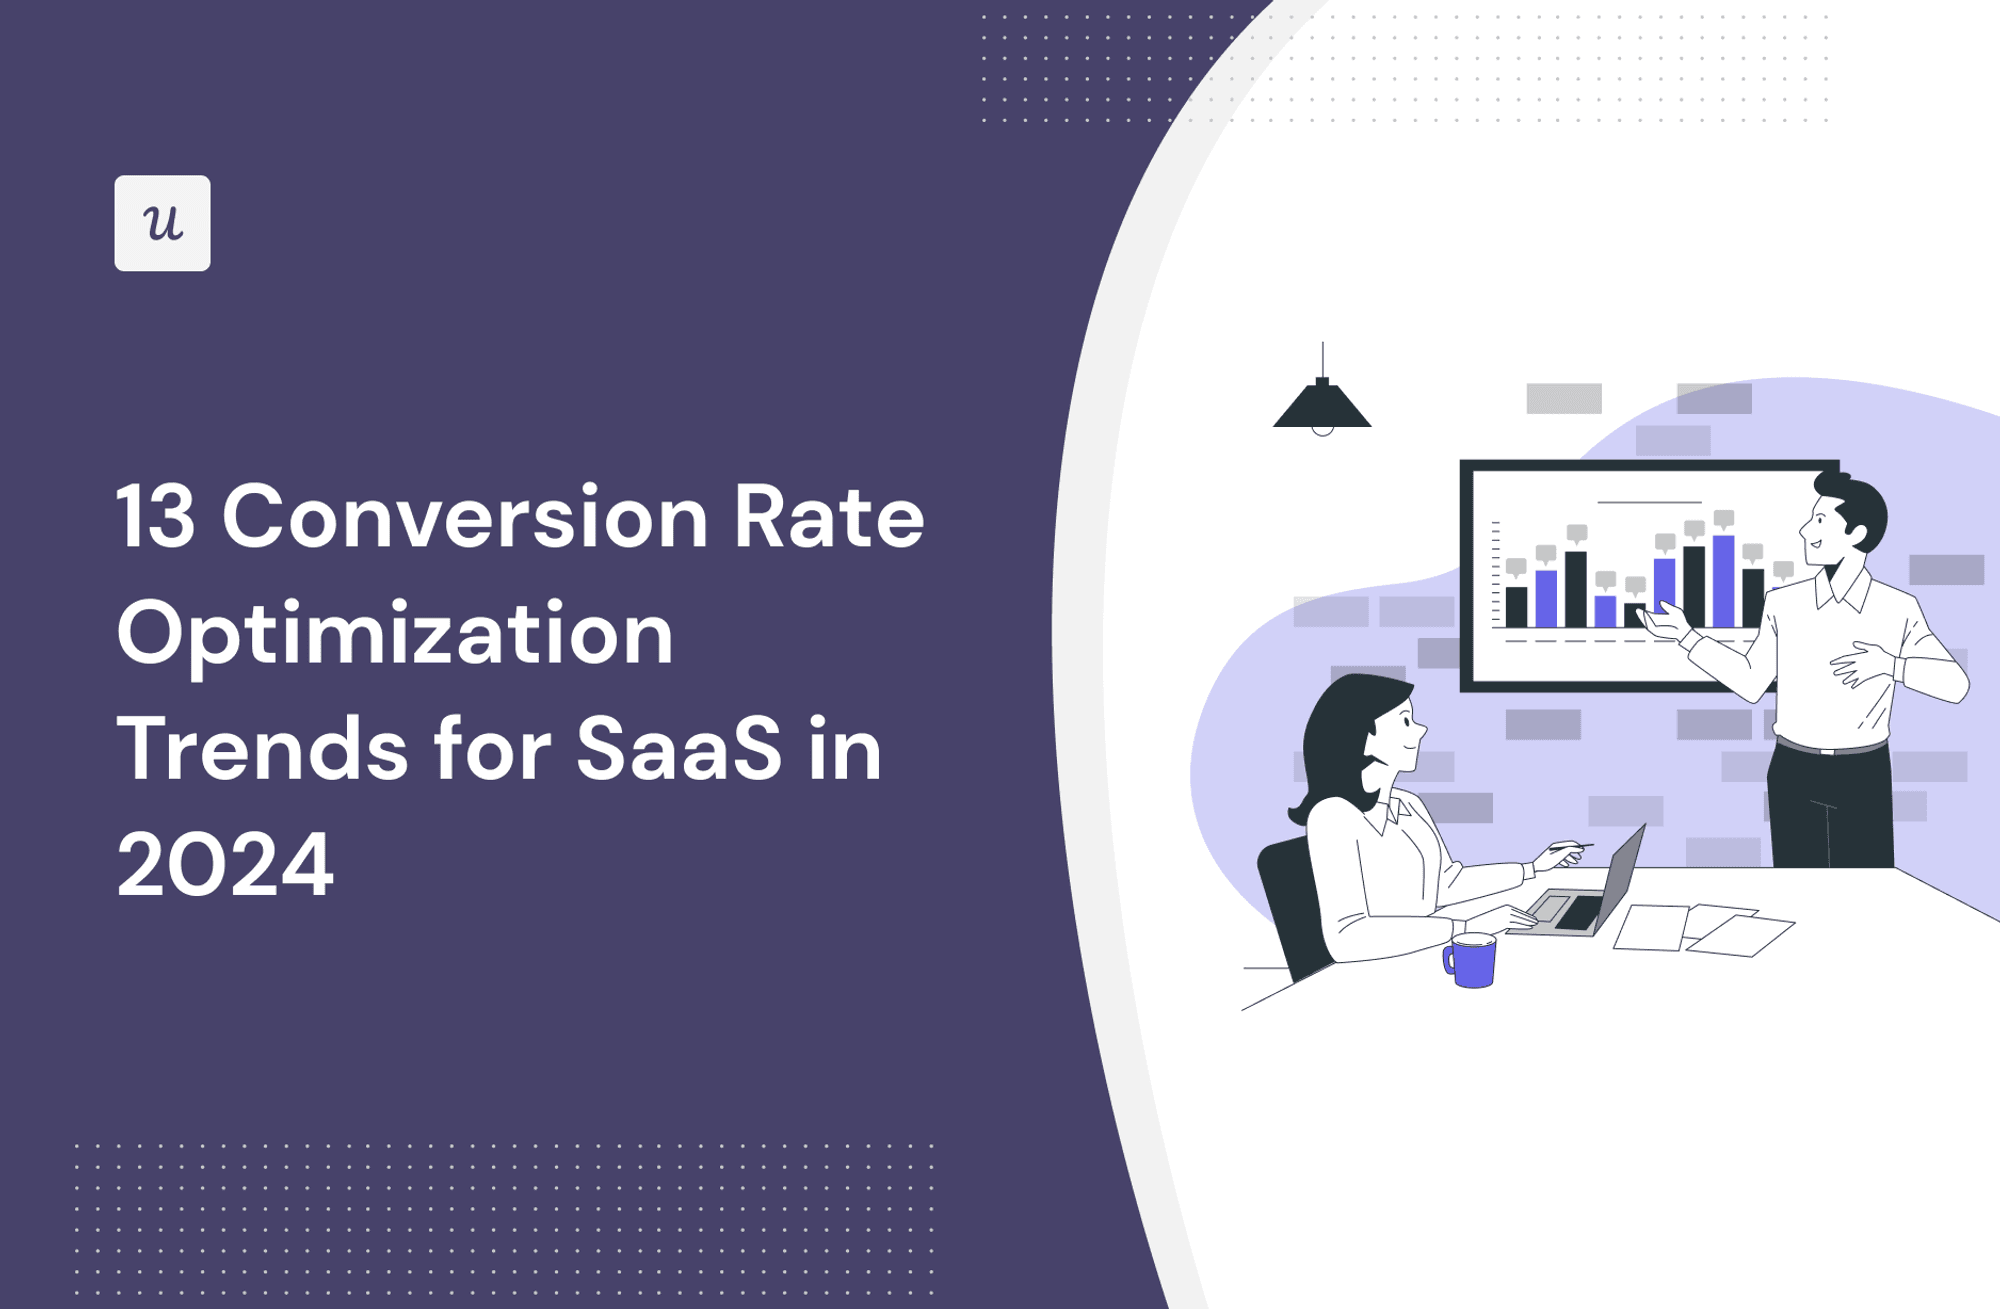 13 Conversion Rate Optimization Trends for SaaS in 2024 cover